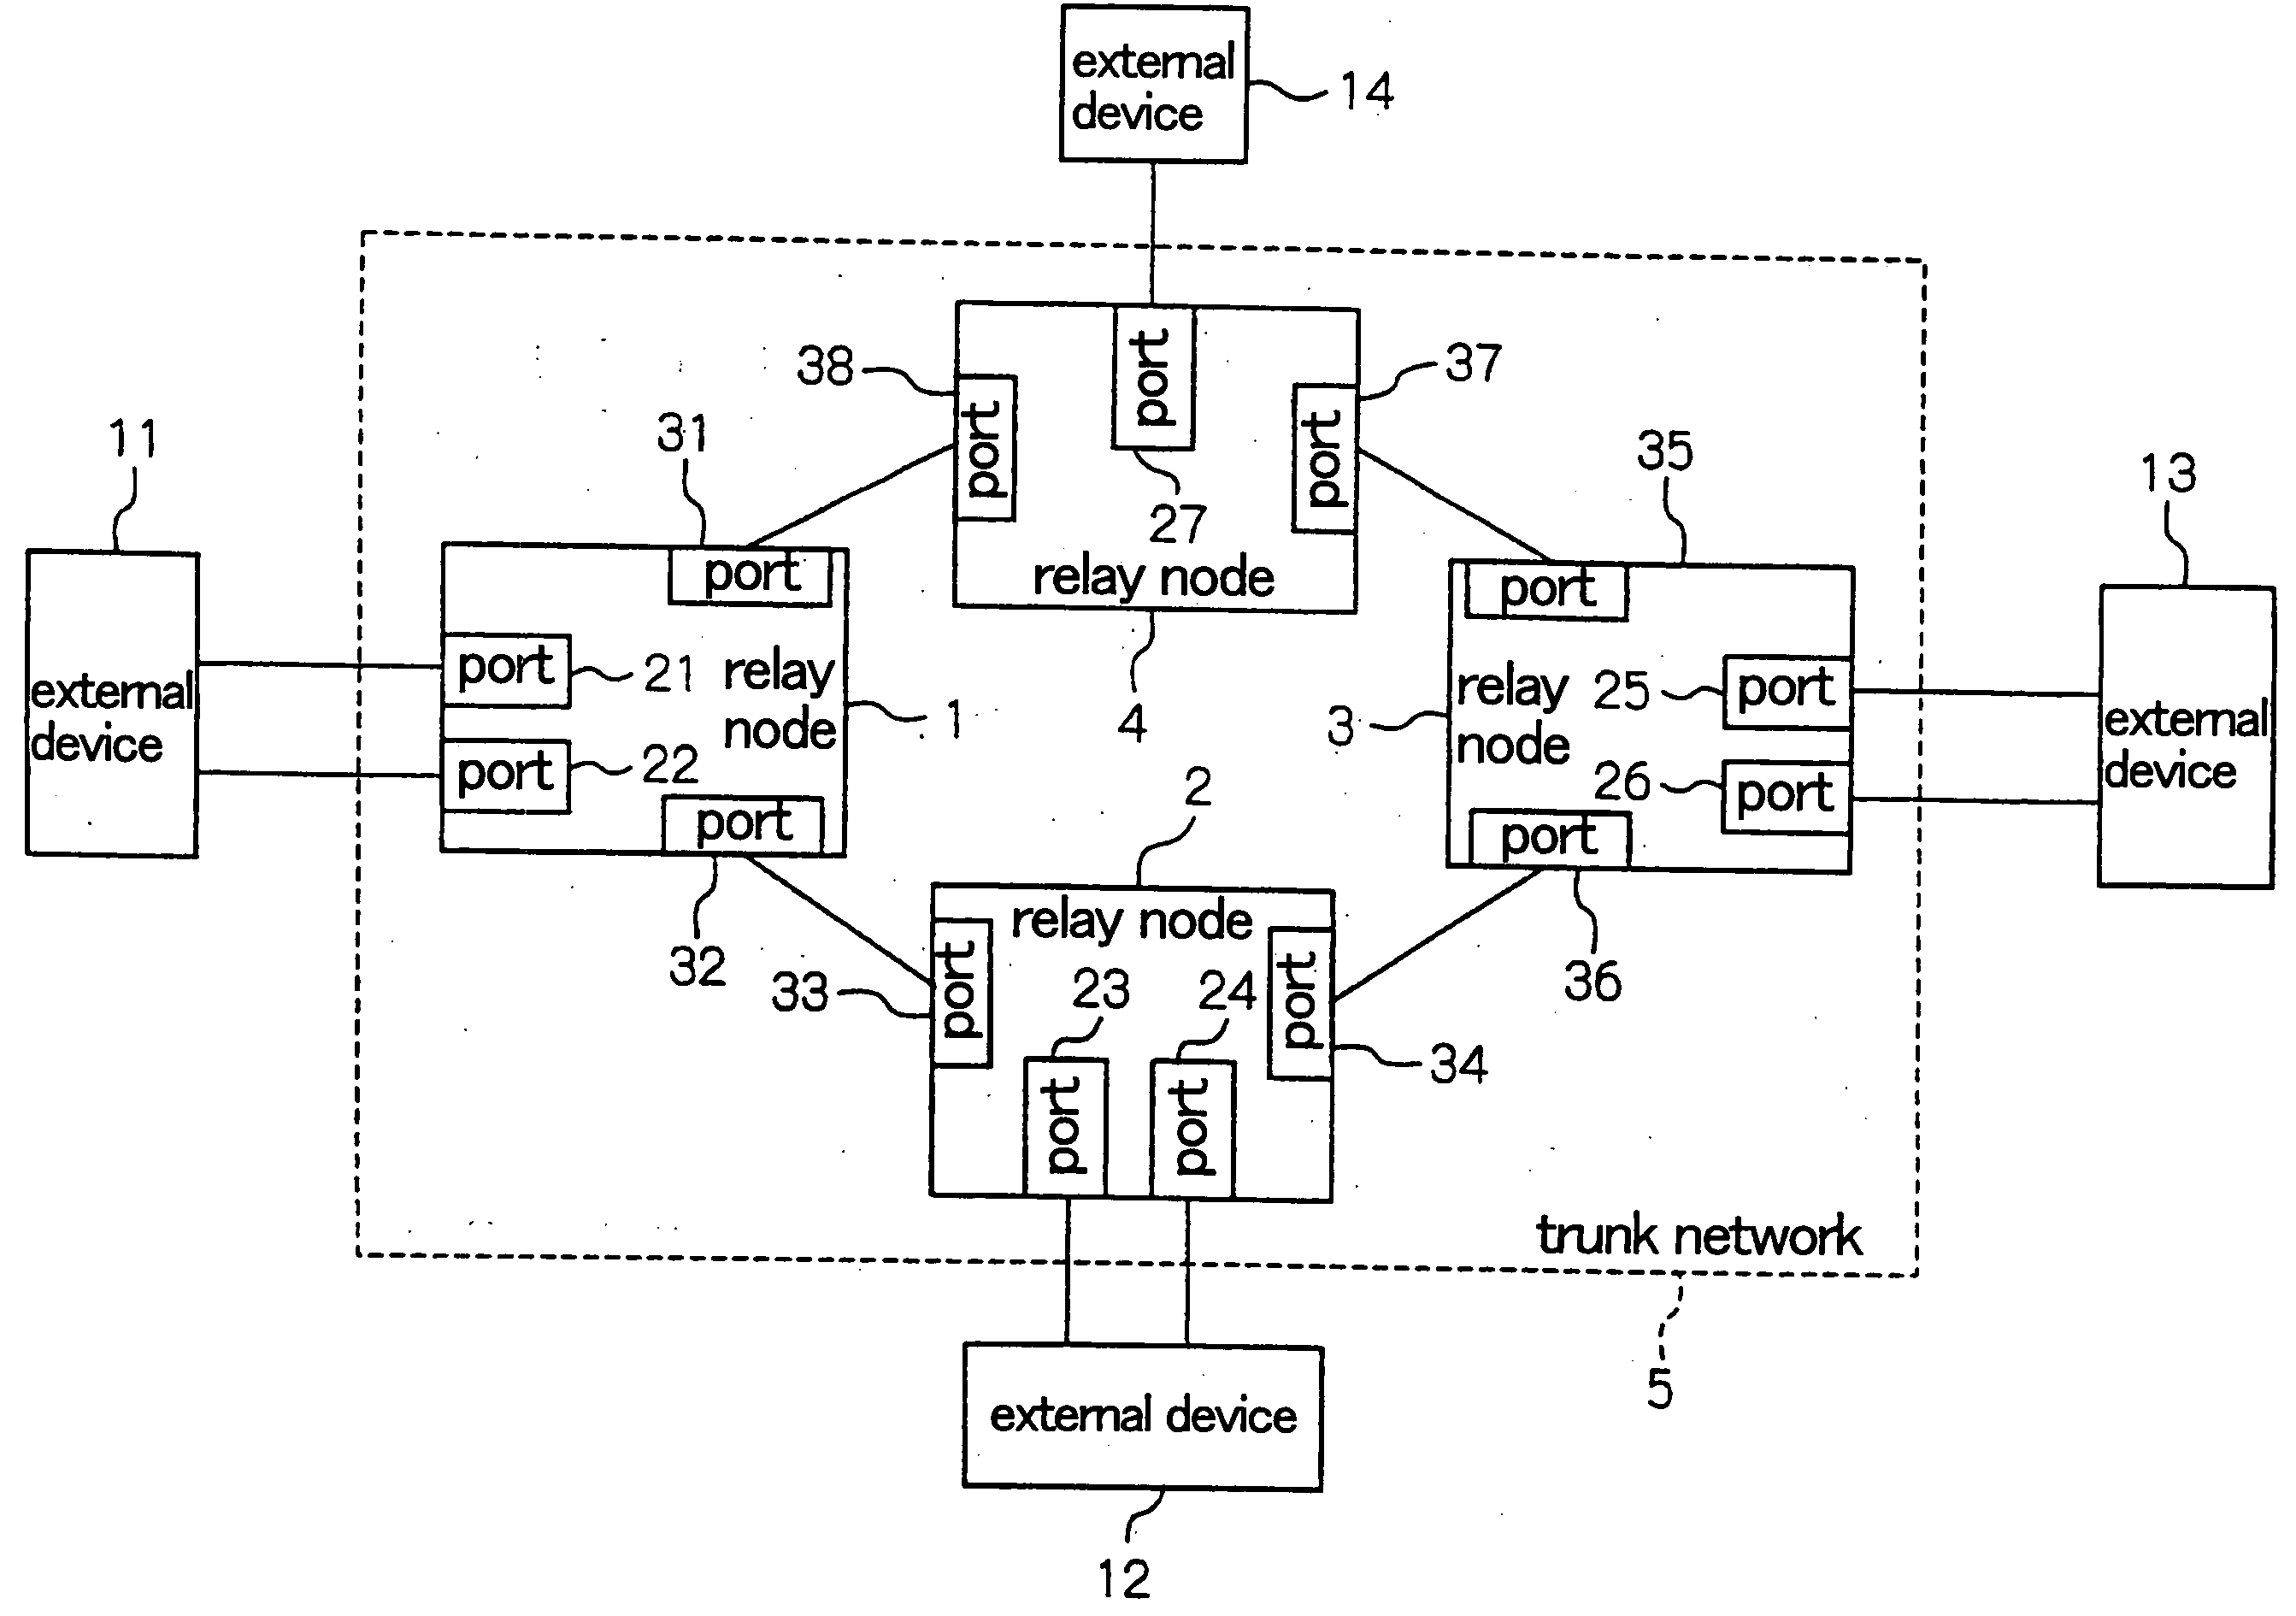 Trunk network system for multipoint-to-multipoint relay